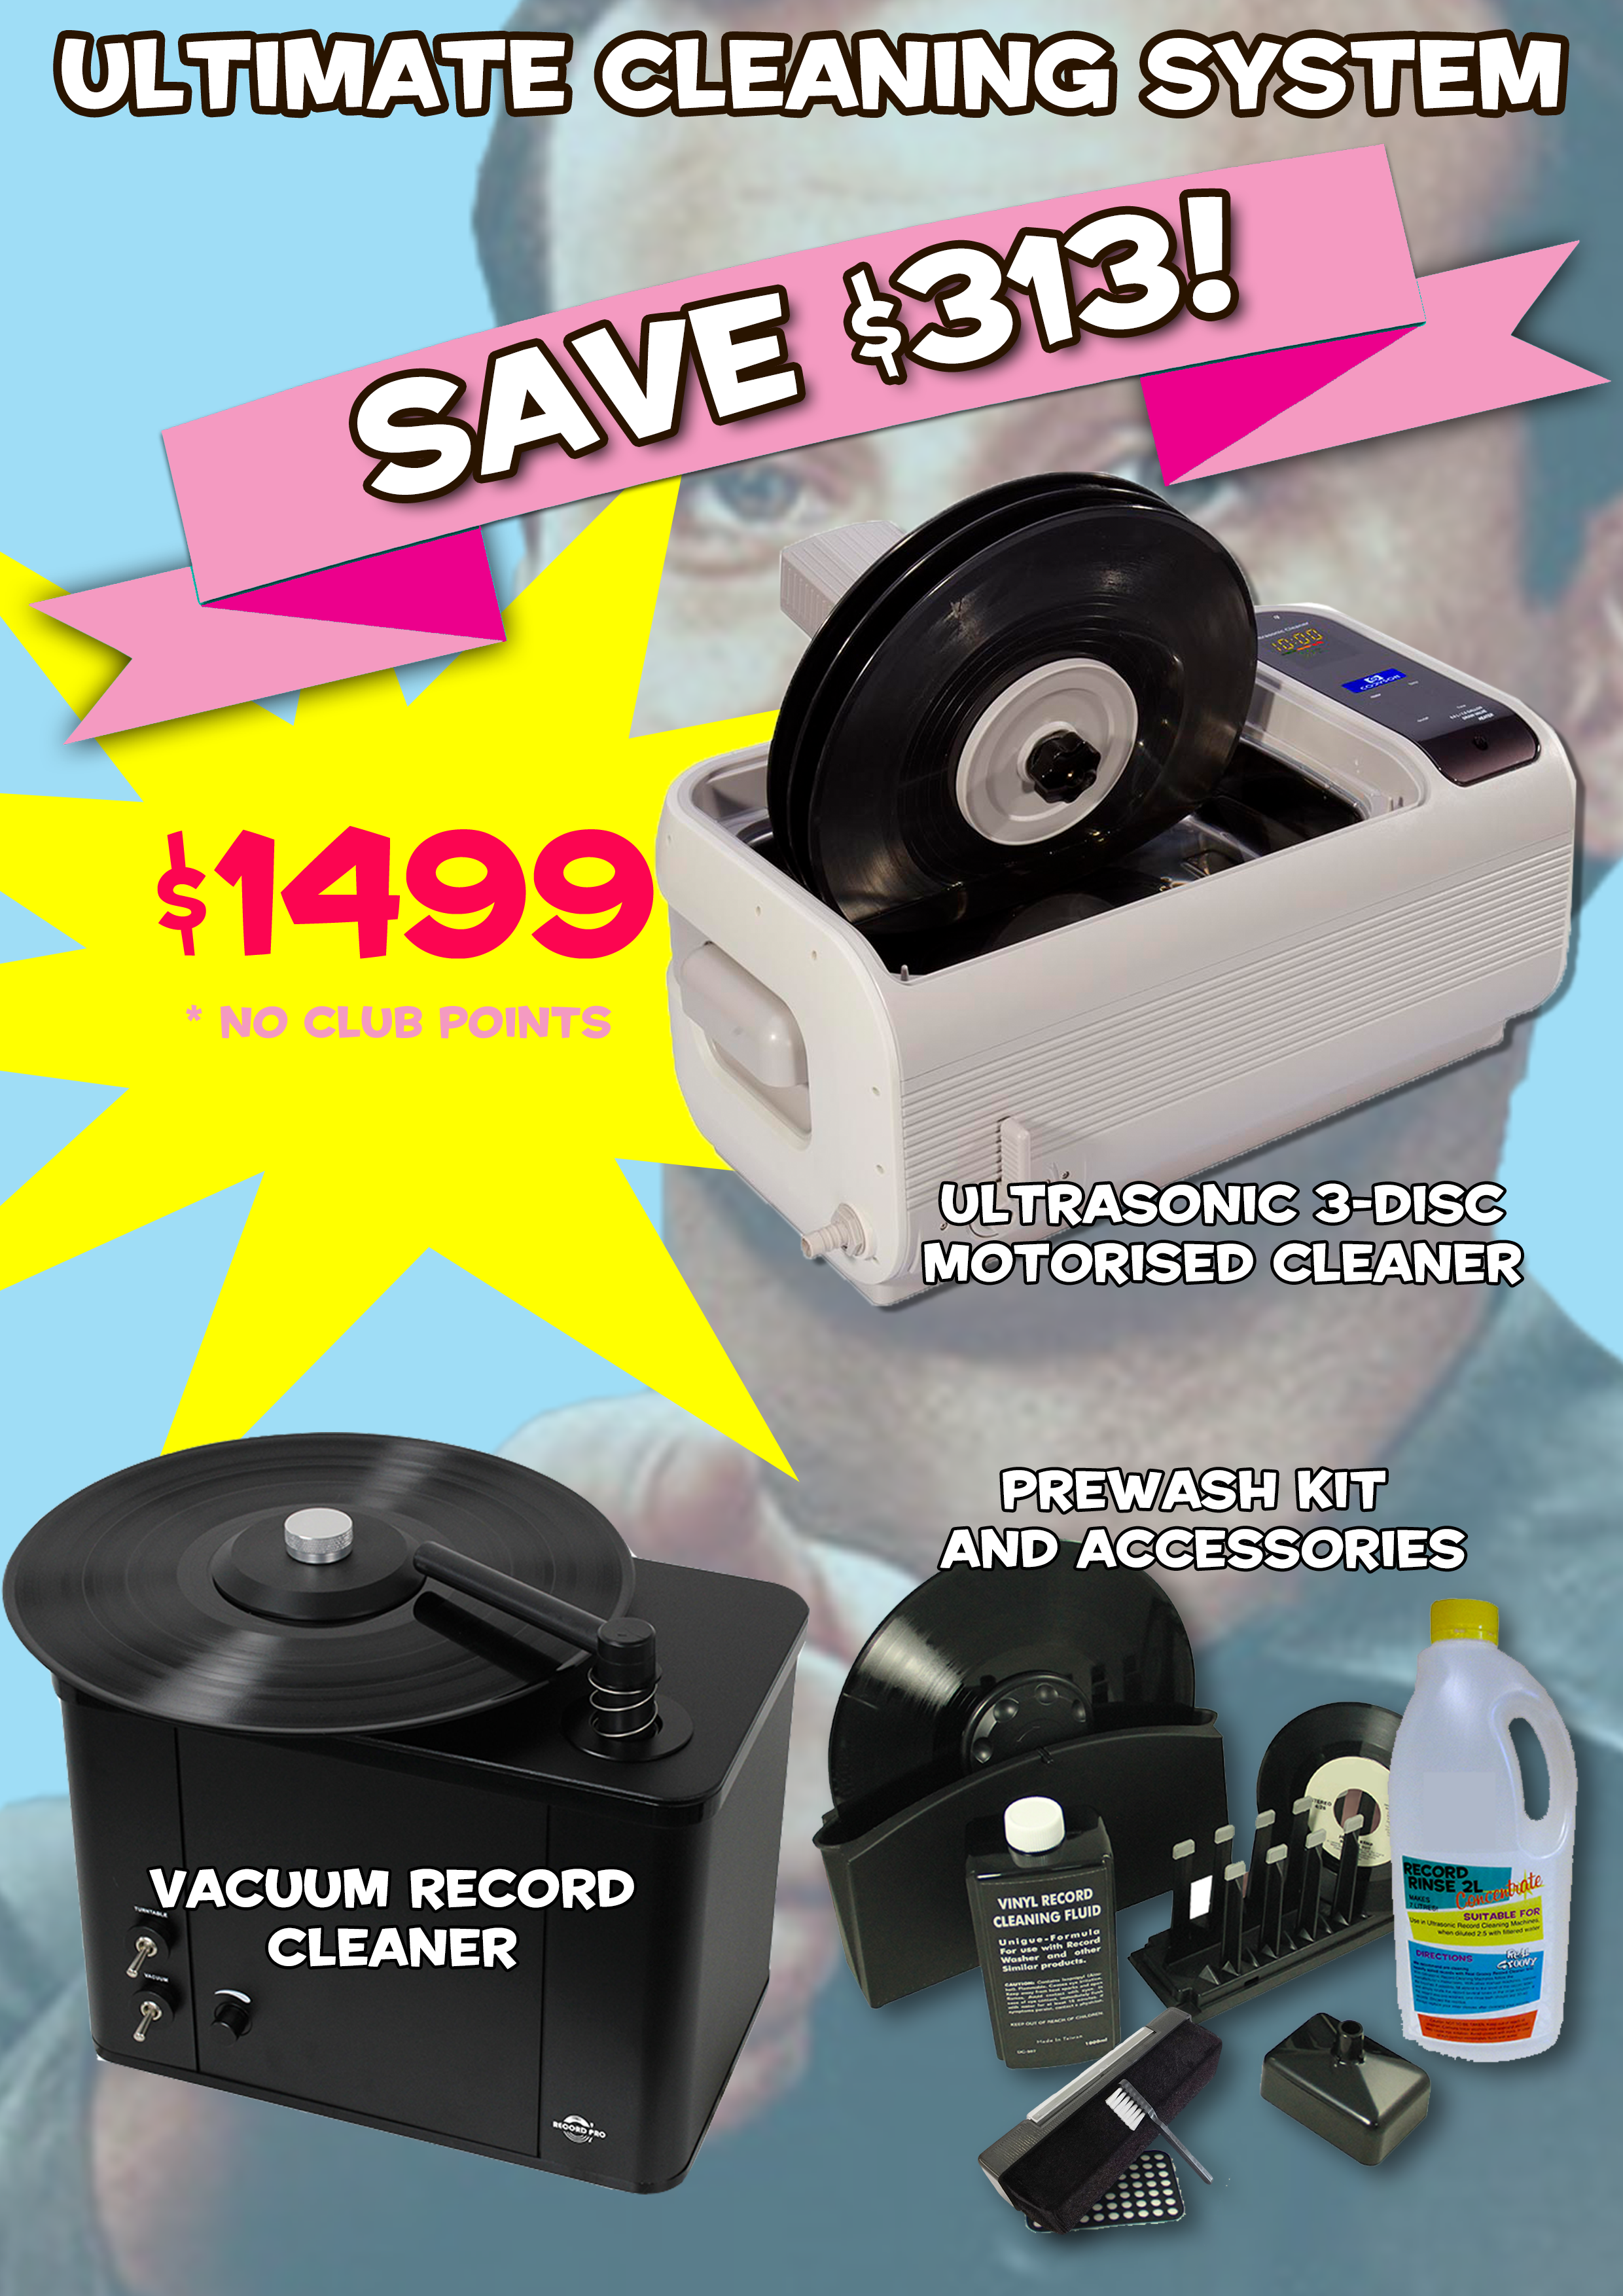 Ultrasonic & Vacuum Record Cleaning System Black